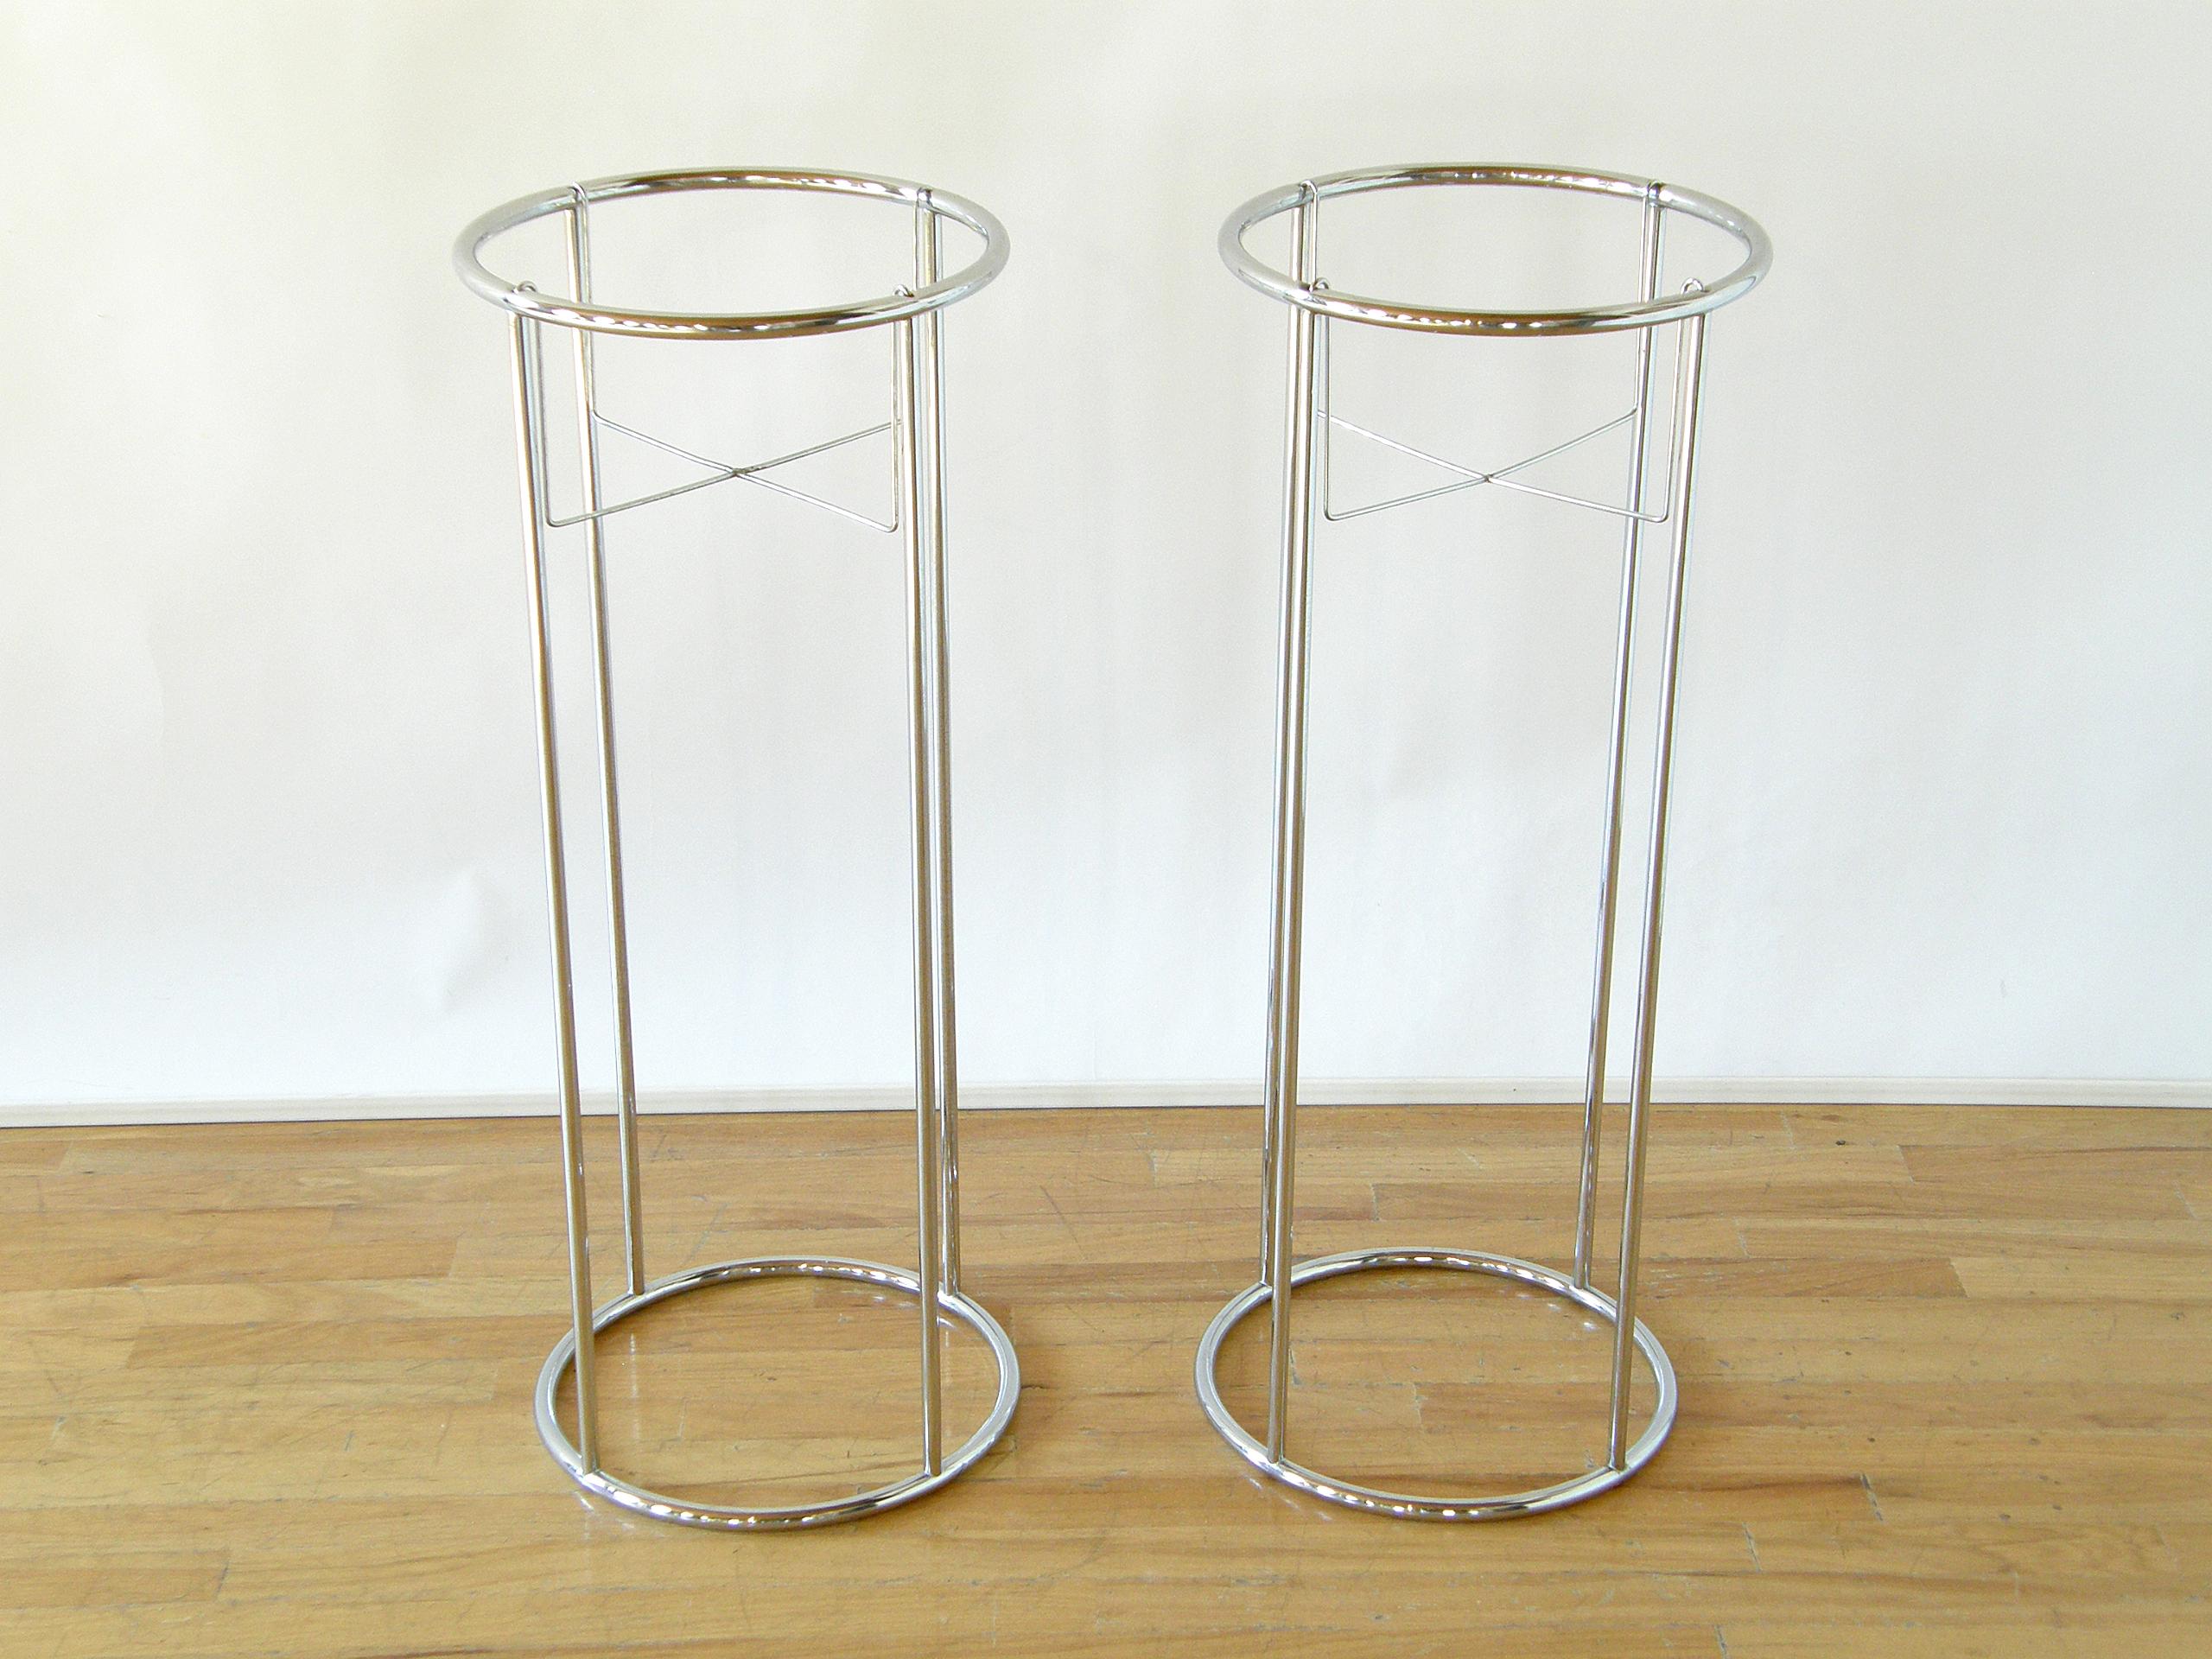 This pair of chrome plant stands has an elegant, Minimalist style. The slender, tubular chrome forms a skeletal, columnar framework. From that hangs a wire cradle that holds your potted plant aloft, like a pedestal for a plant. The chrome reflects